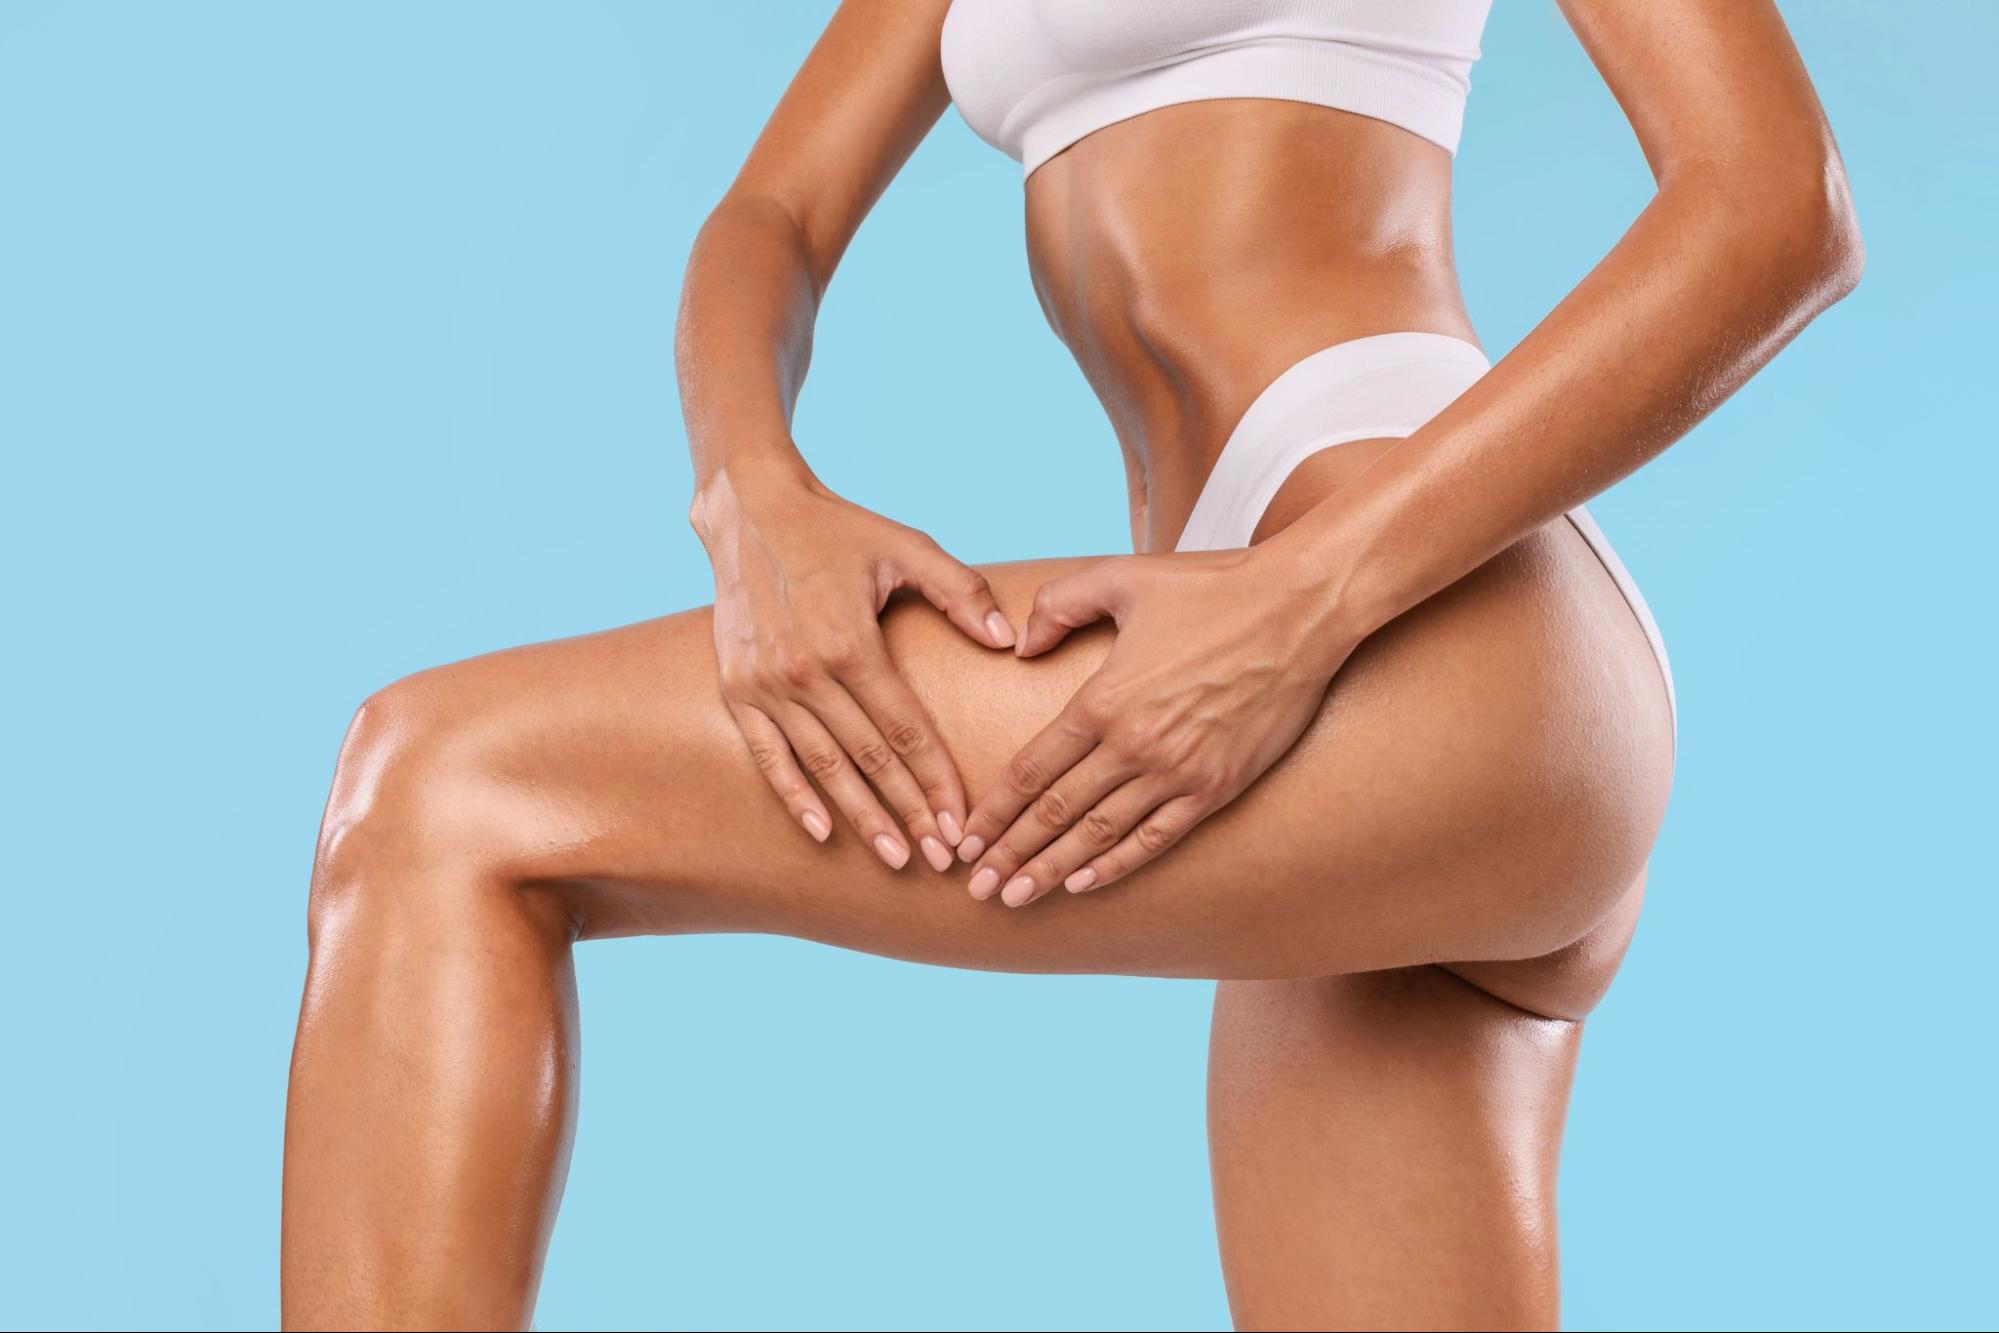 After a Thigh Lift Surgery: What You Need to Know